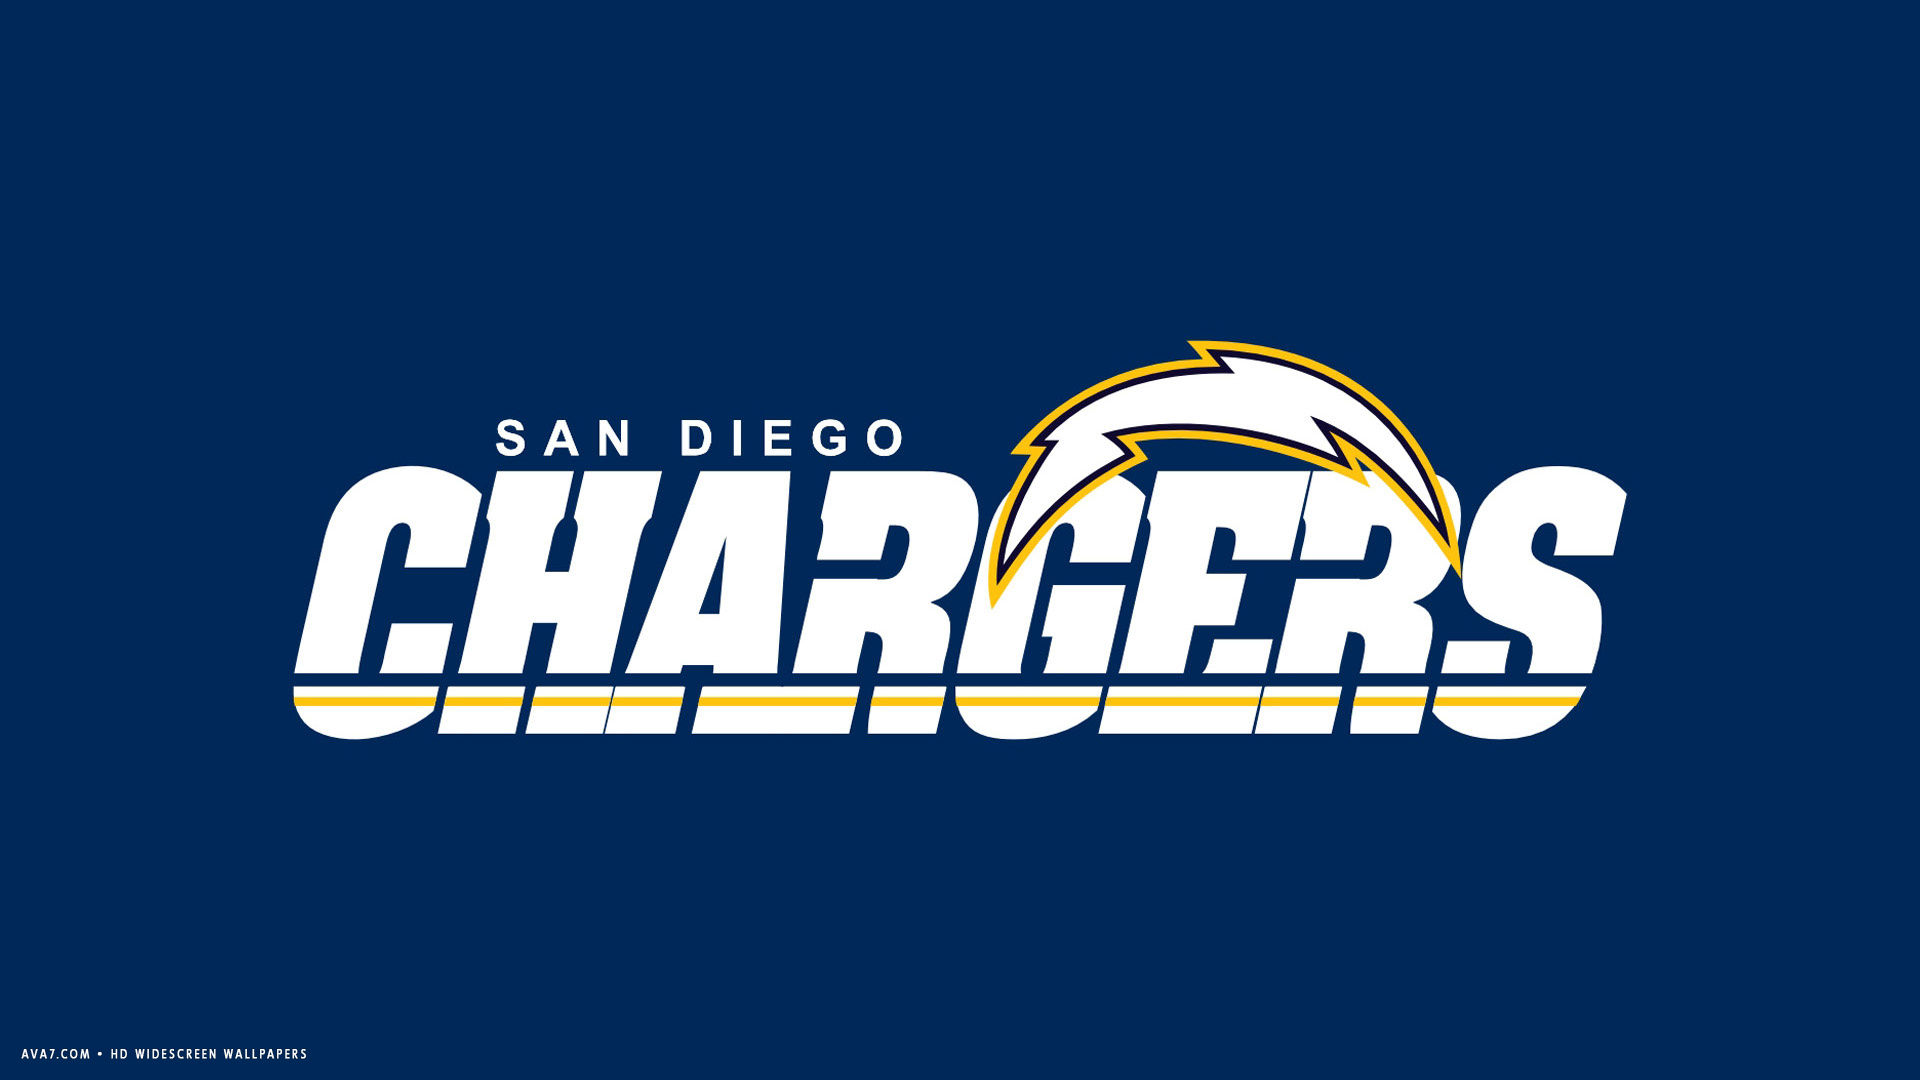 San Diego Chargers Hd Widescreen Wallpaper - Nfl Logo San Diego Chargers - HD Wallpaper 